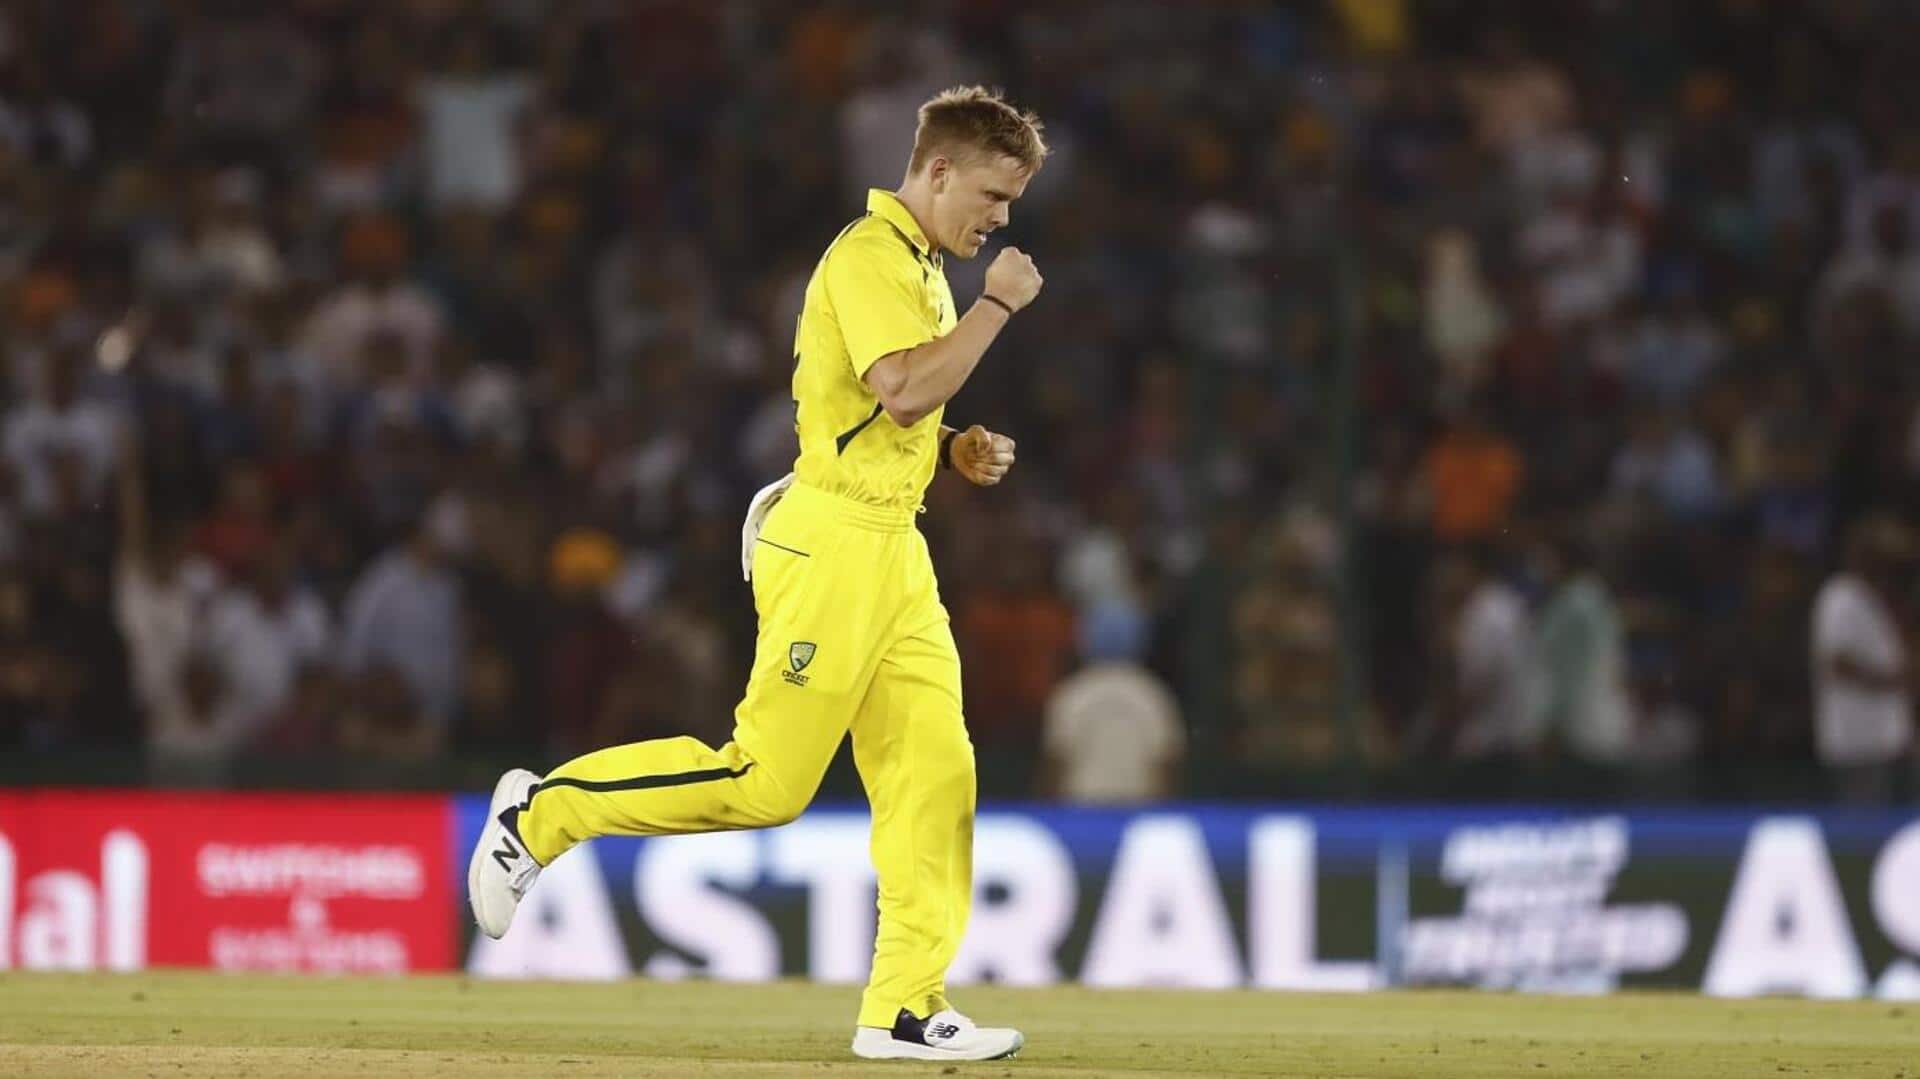 SA vs AUS: Ellis claims 3/25 in the second T20I